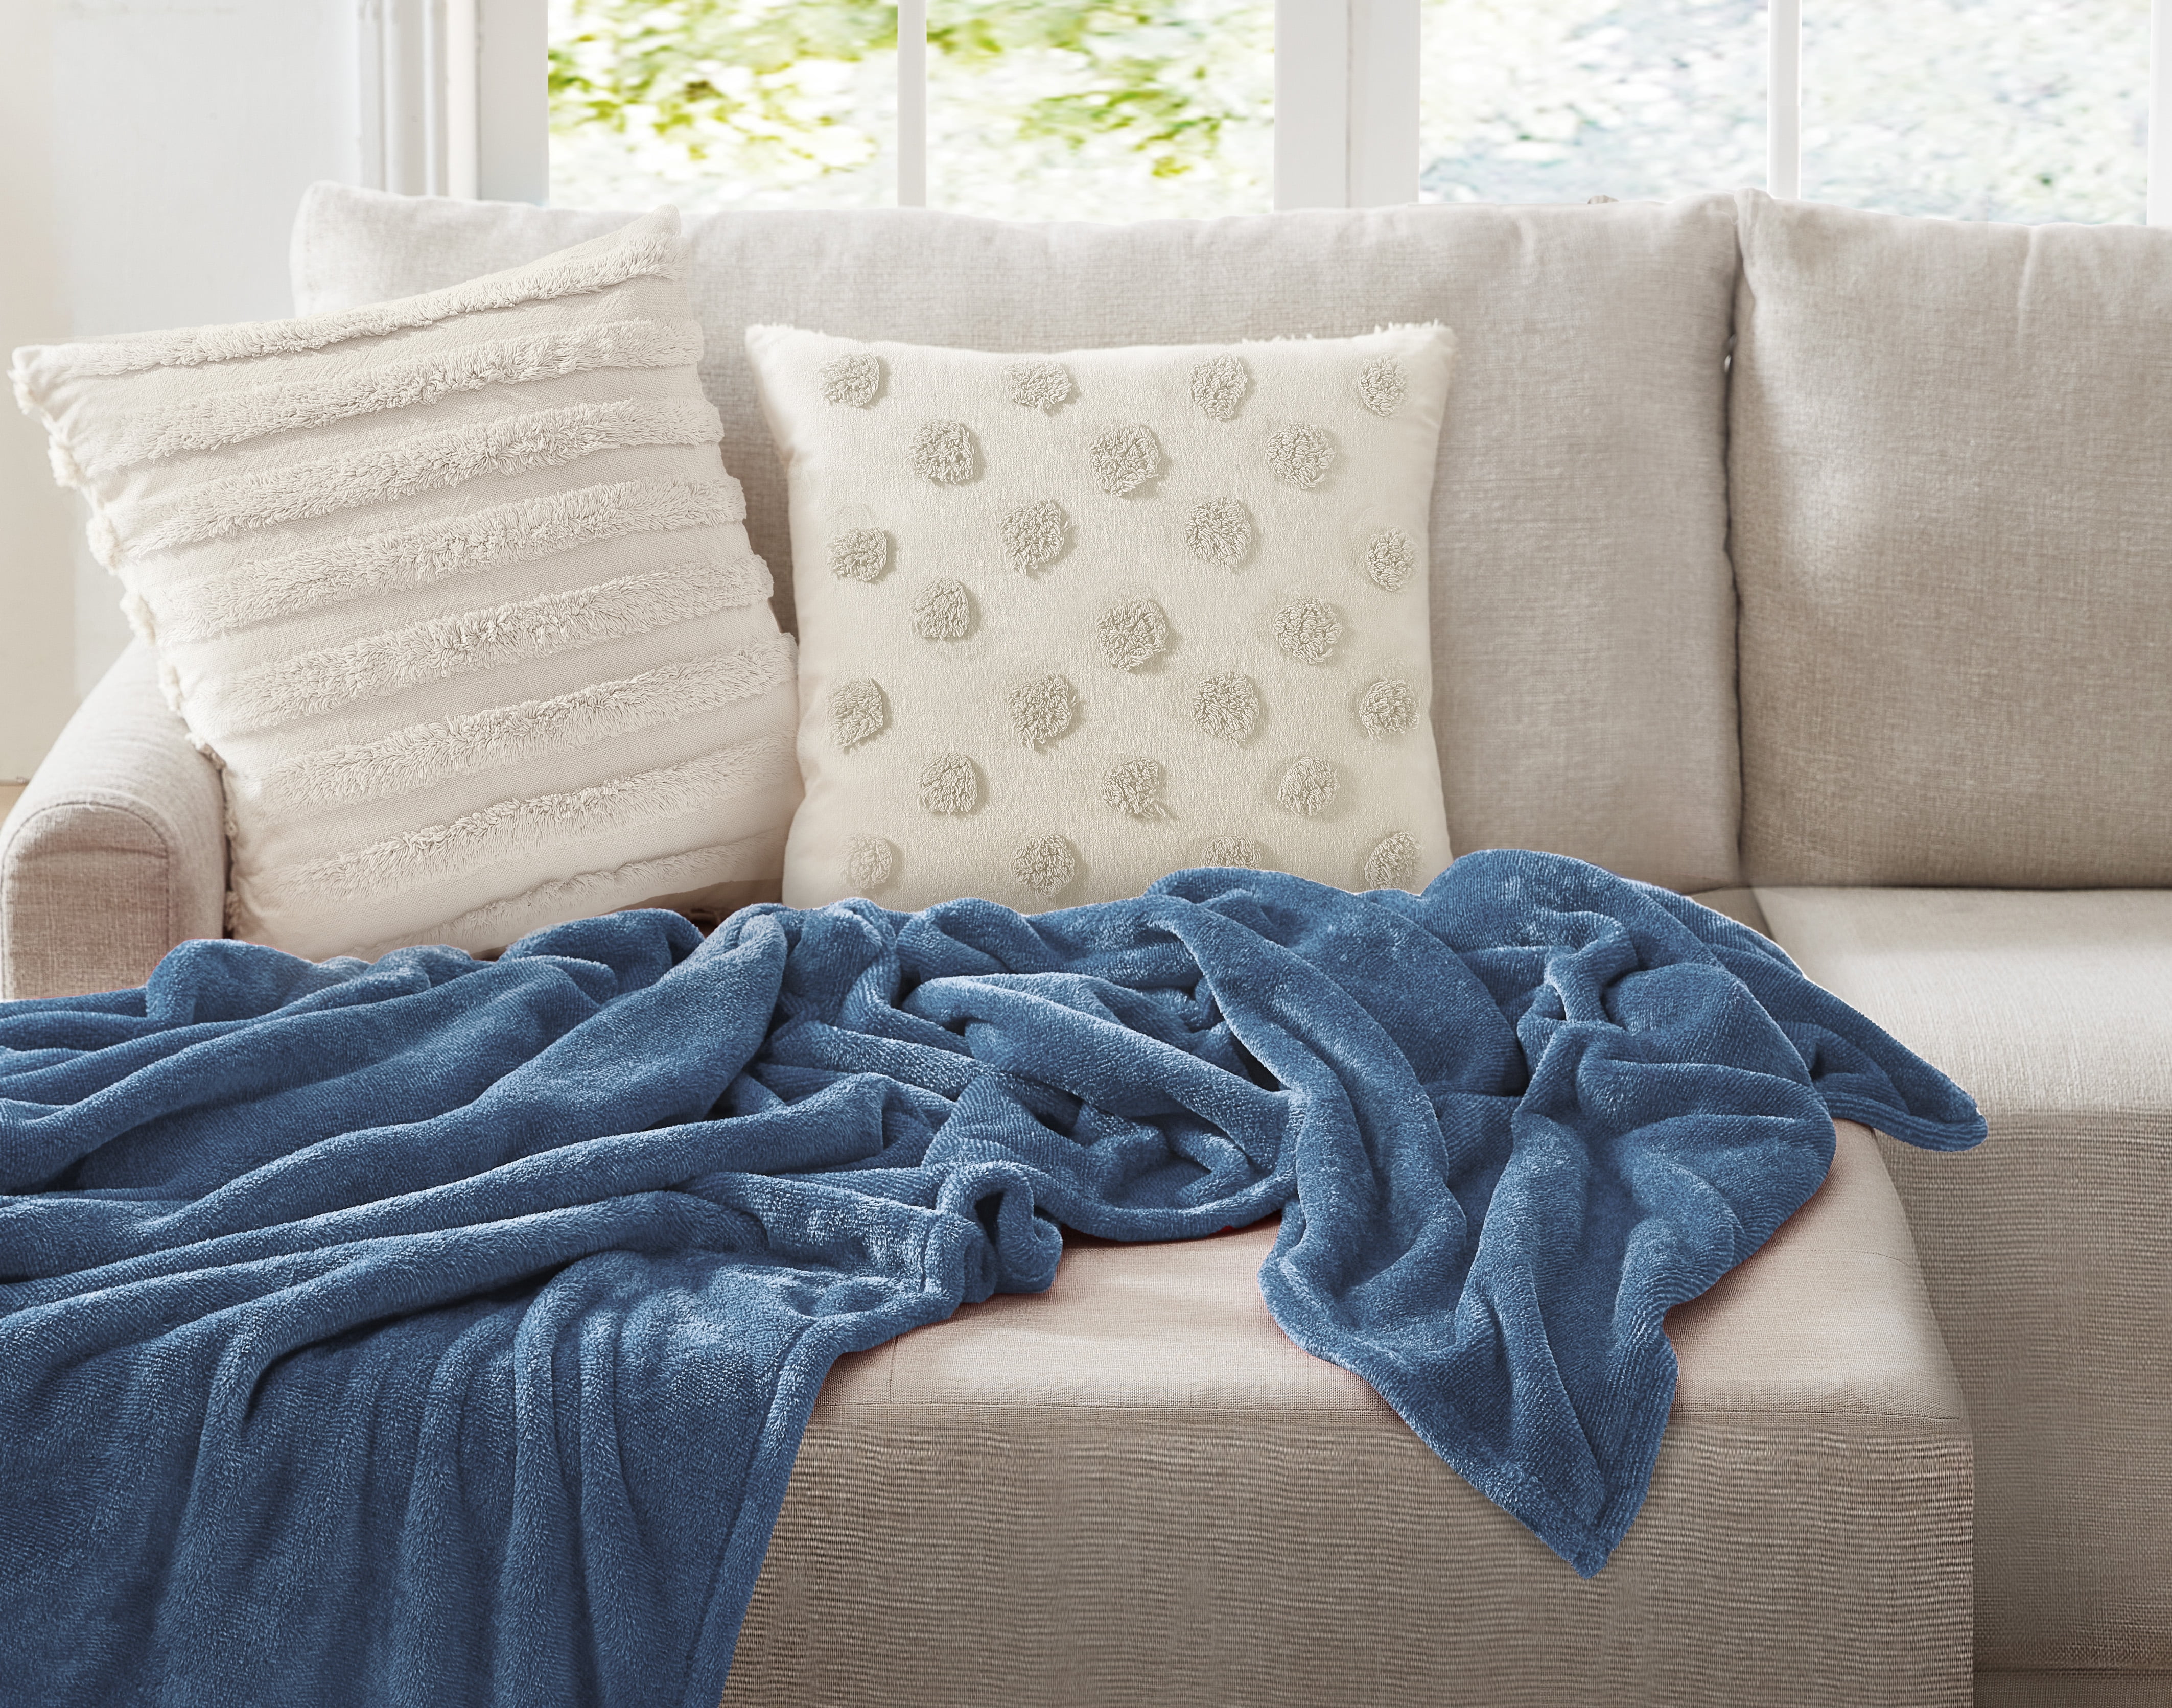 Mainstays Solid Plush Blanket, Blue, Full/Queen